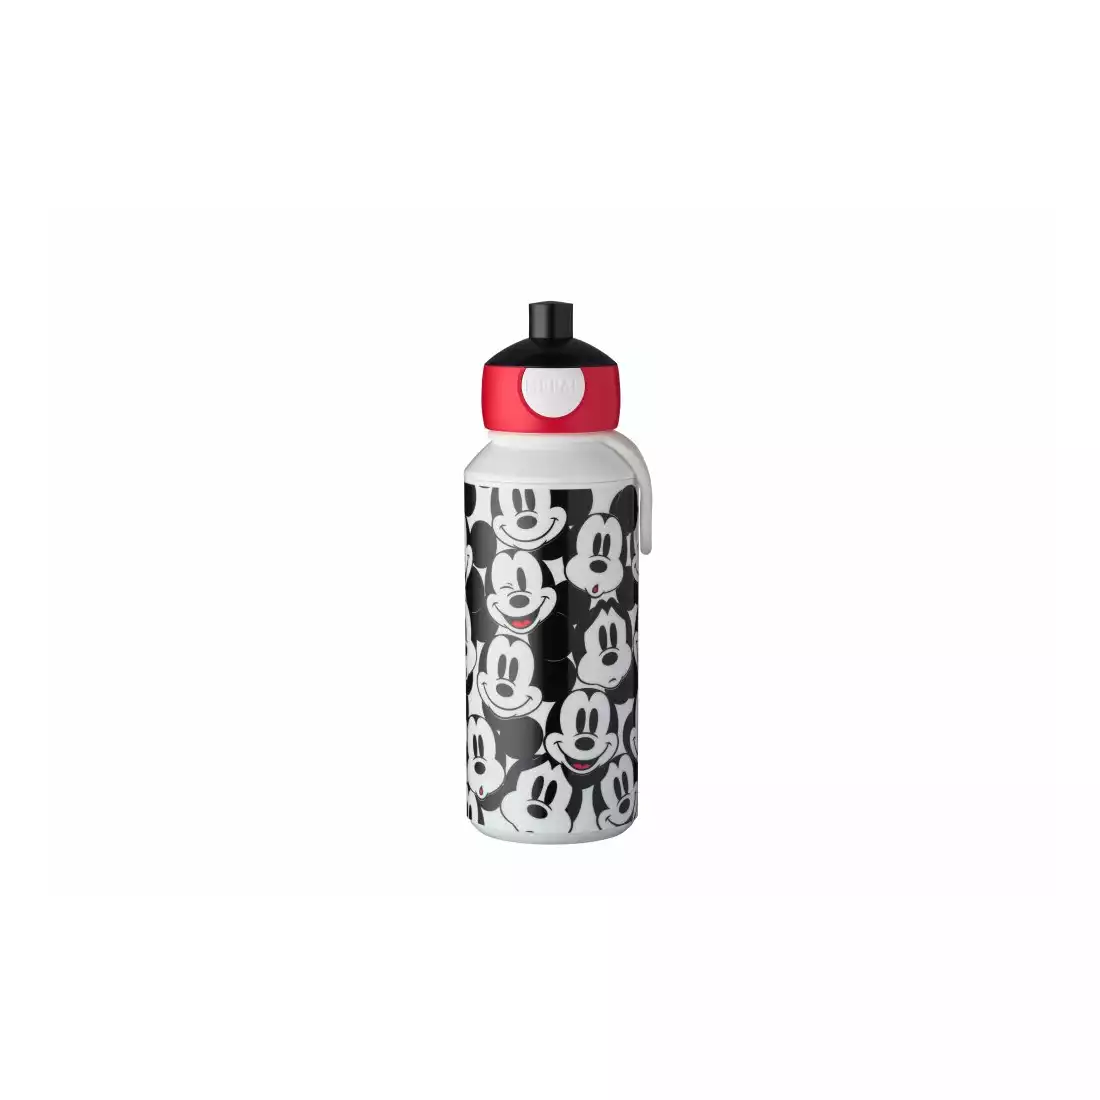 Mepal Campus Lunch set Mickey Mouse children's set water bottle + lunchbox, black and red